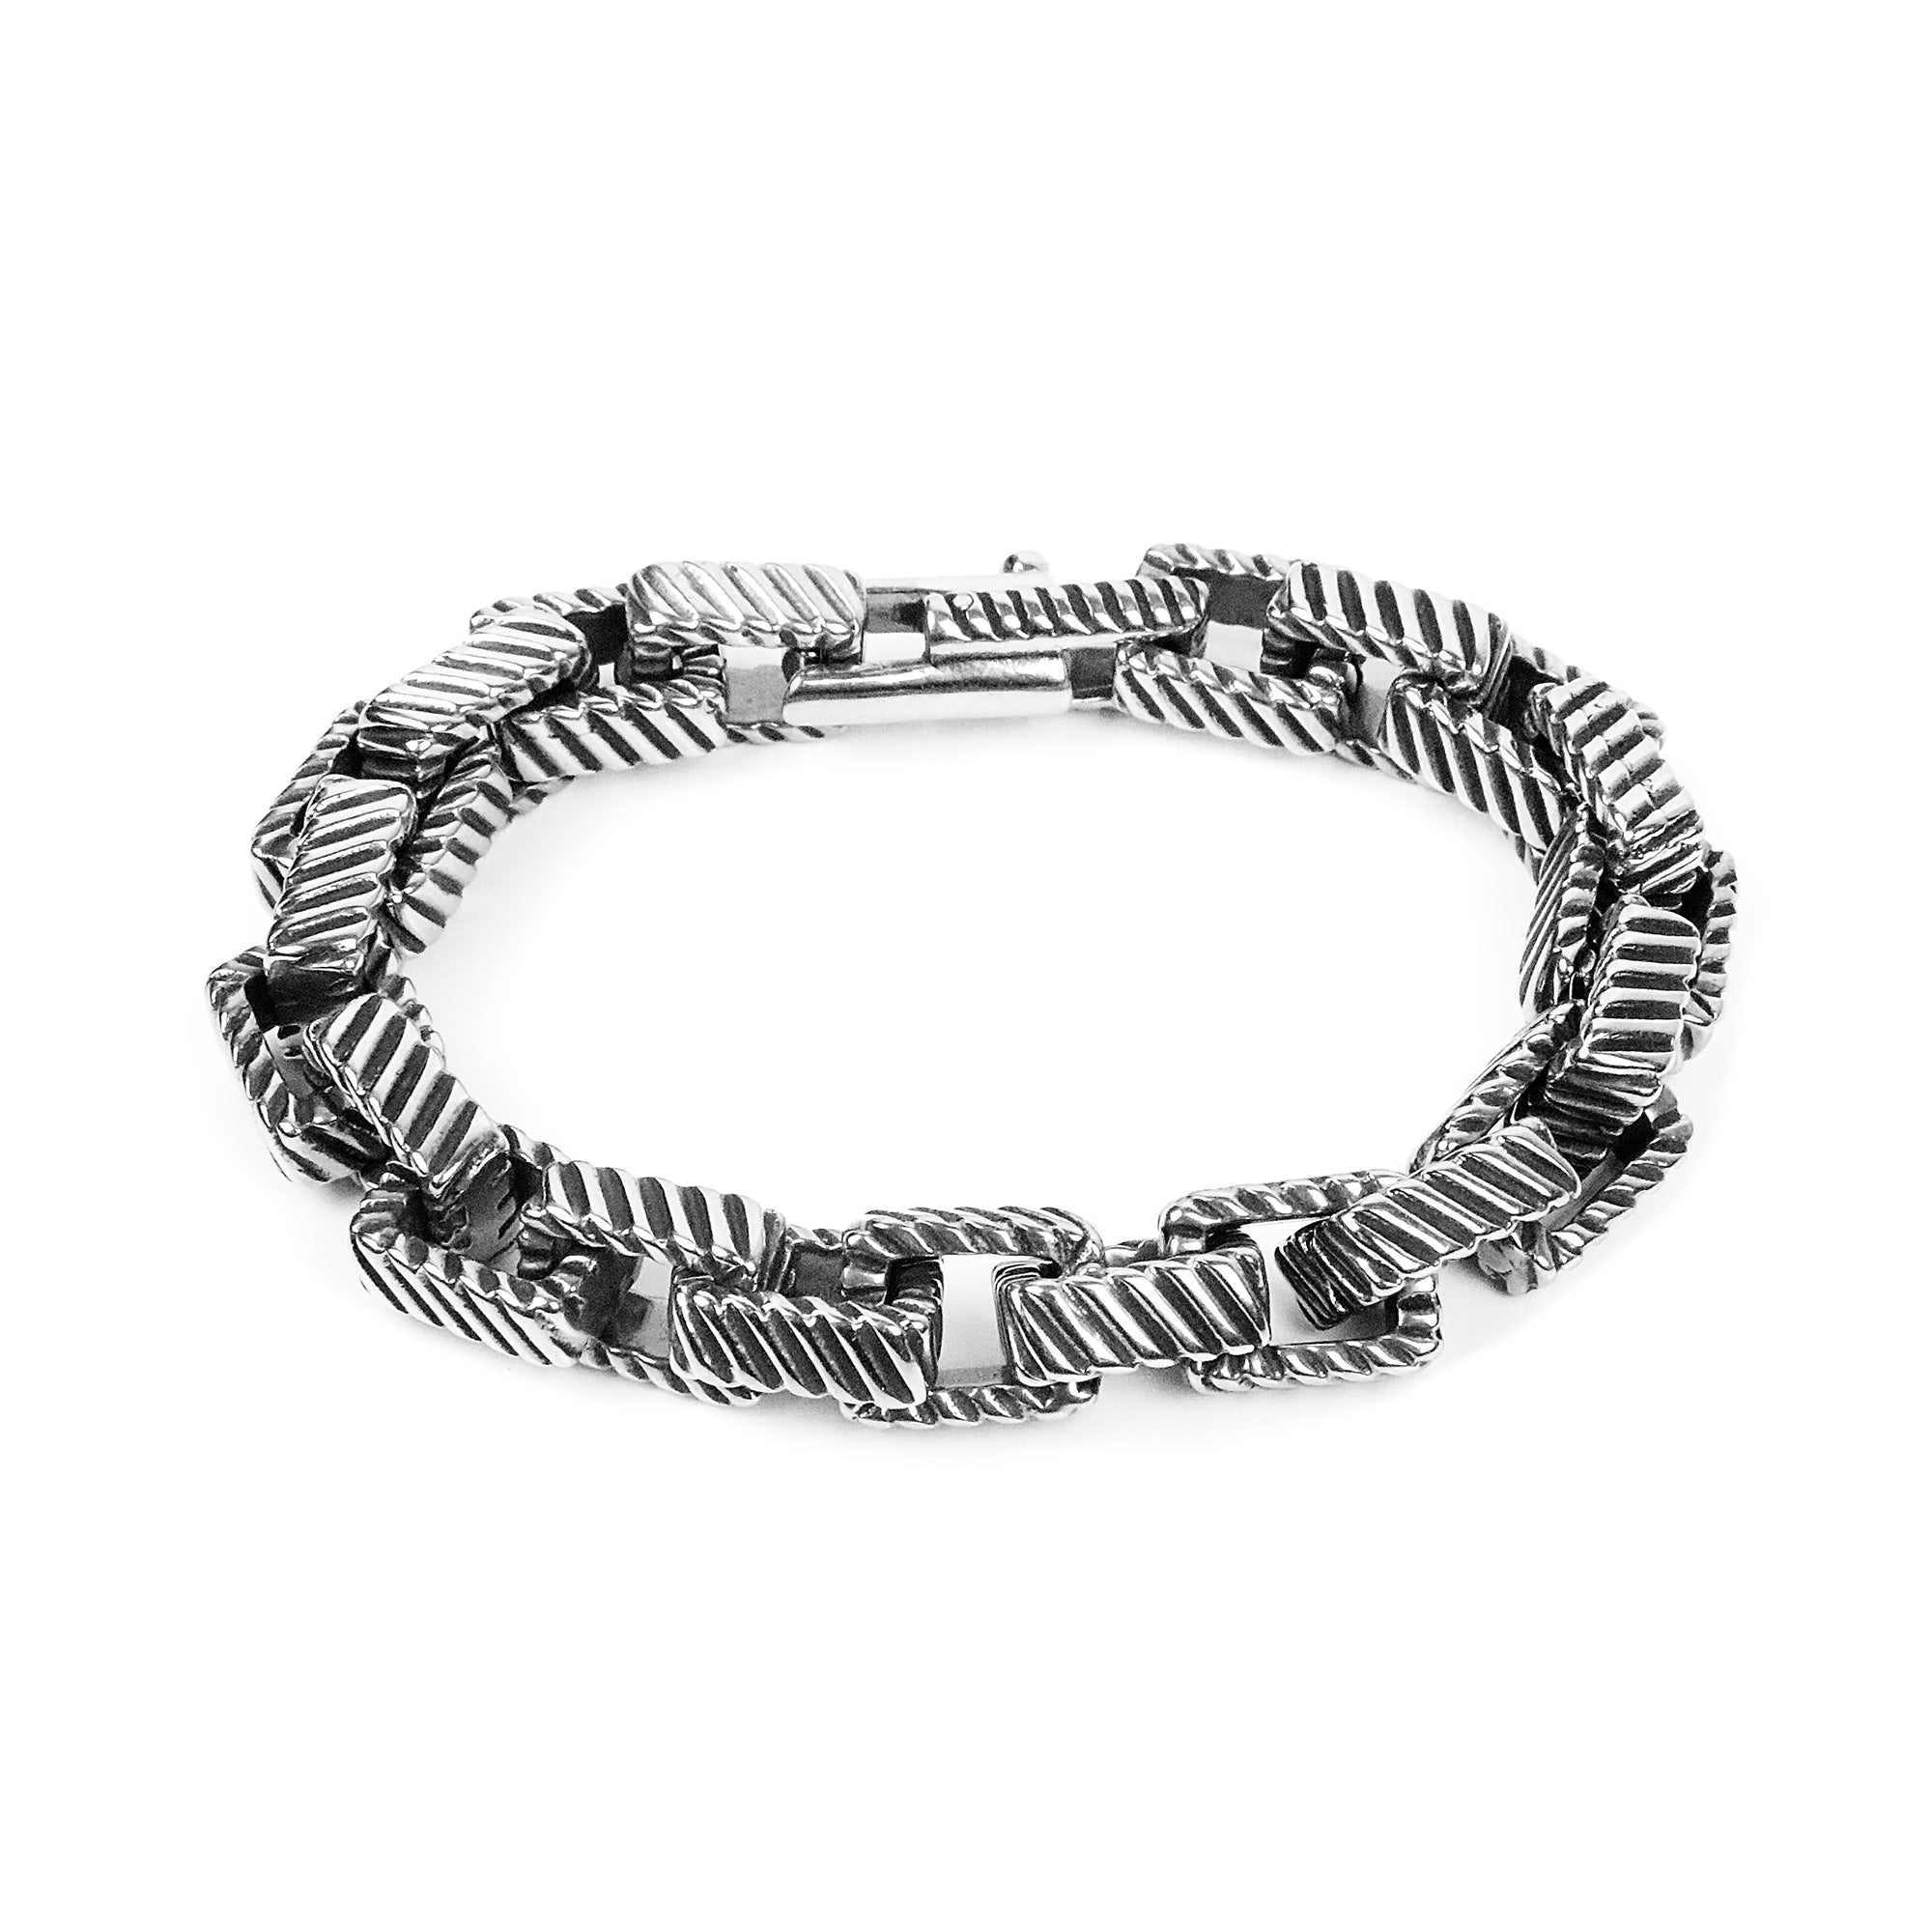 Rugged Chain Bracelet - Silver 12mm